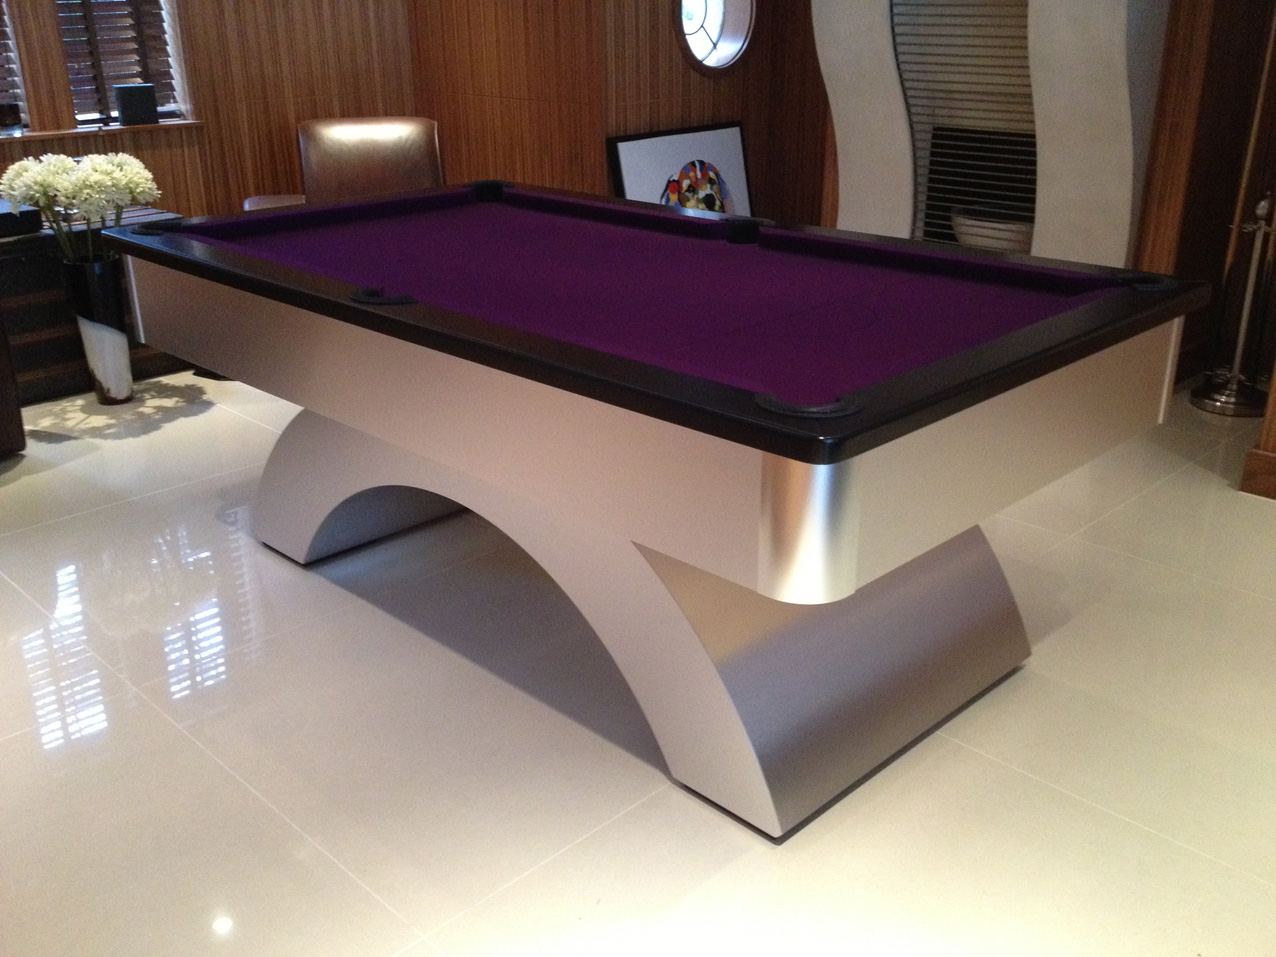 Arched Contemporary English Pool Table with Brushed Aluminium and Beech Cushion Rail